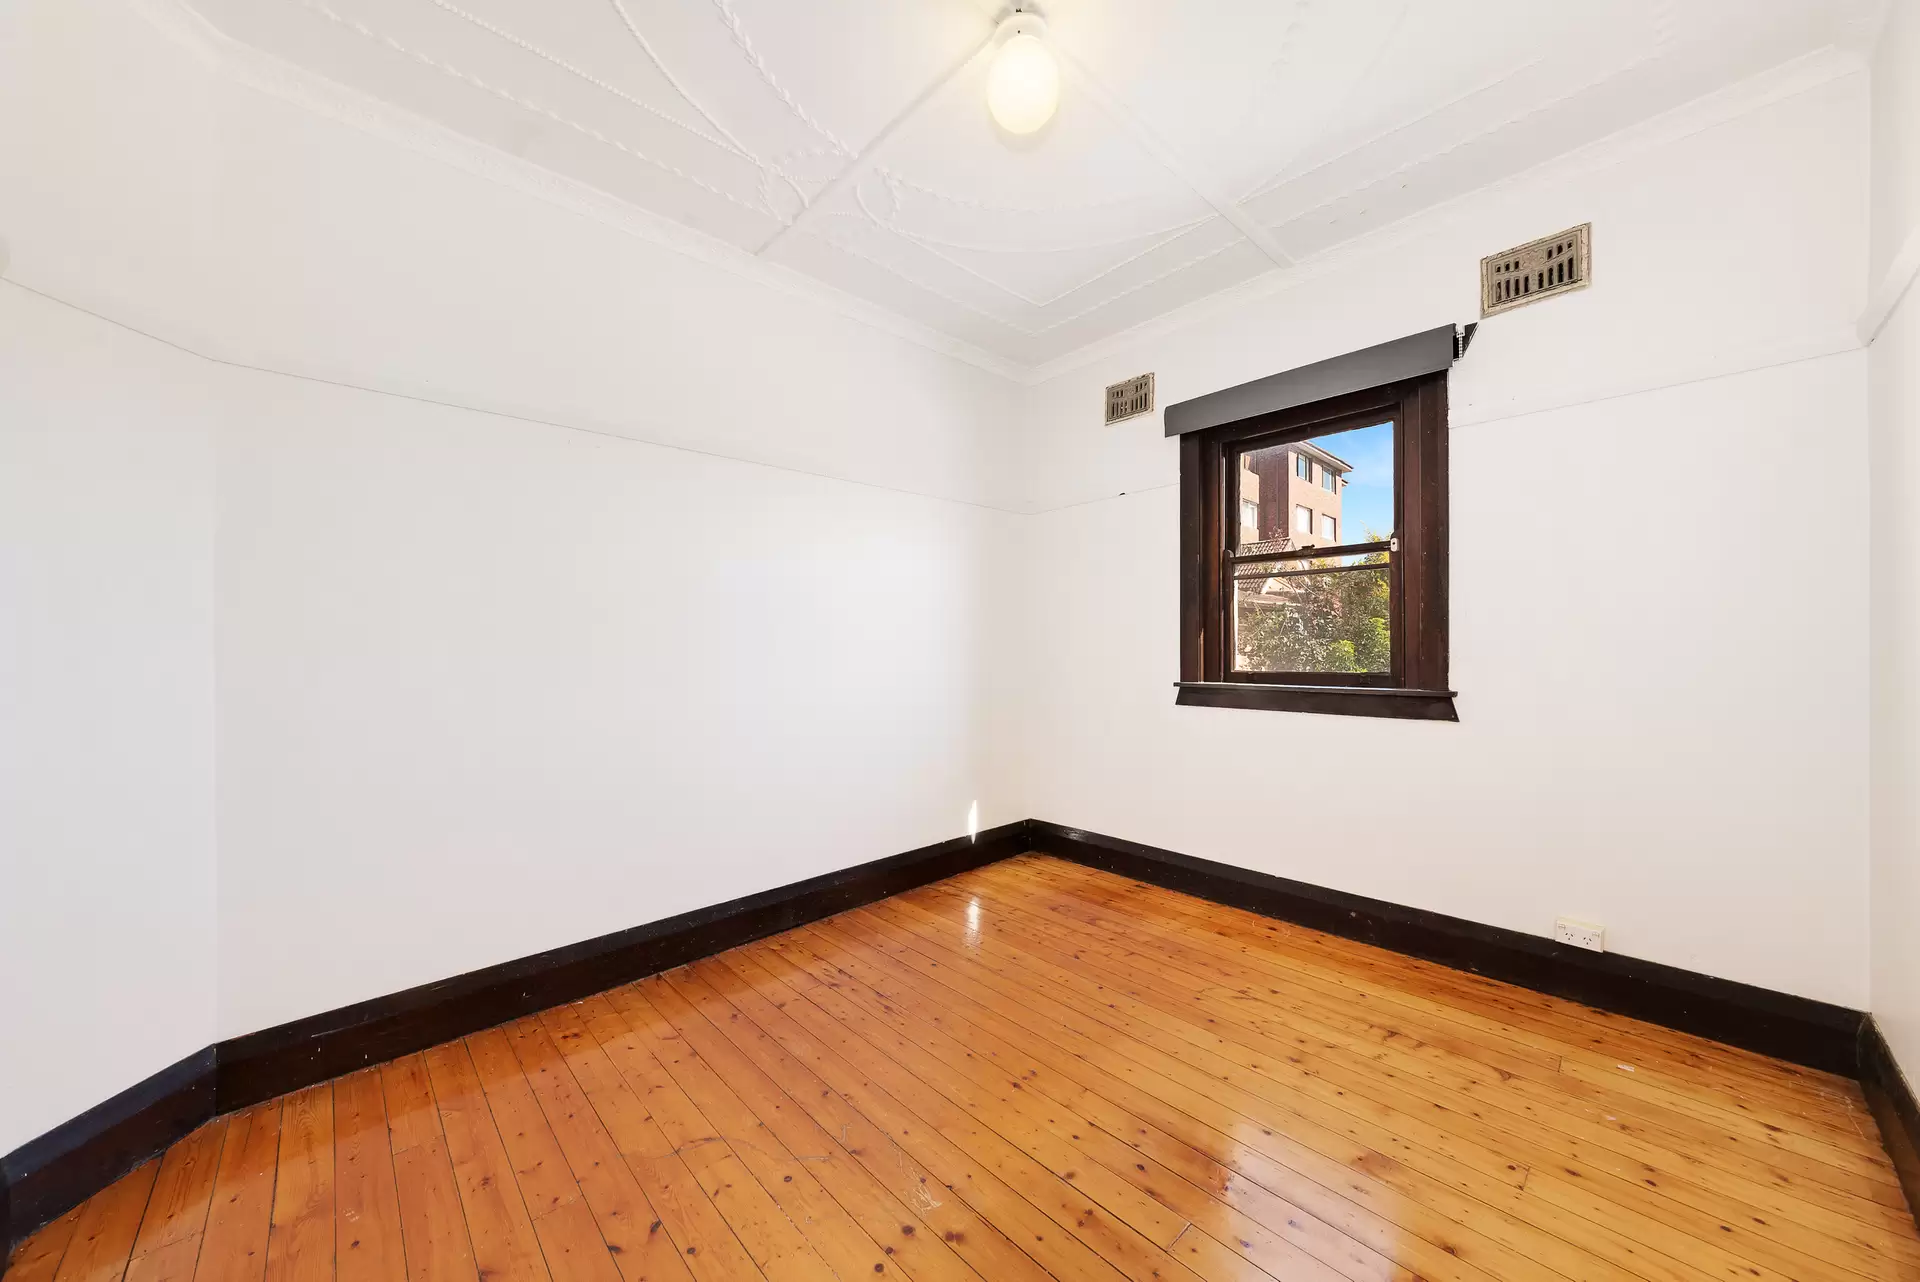 5/12 Dudley Street, Coogee For Lease by Raine & Horne Randwick | Coogee - image 1